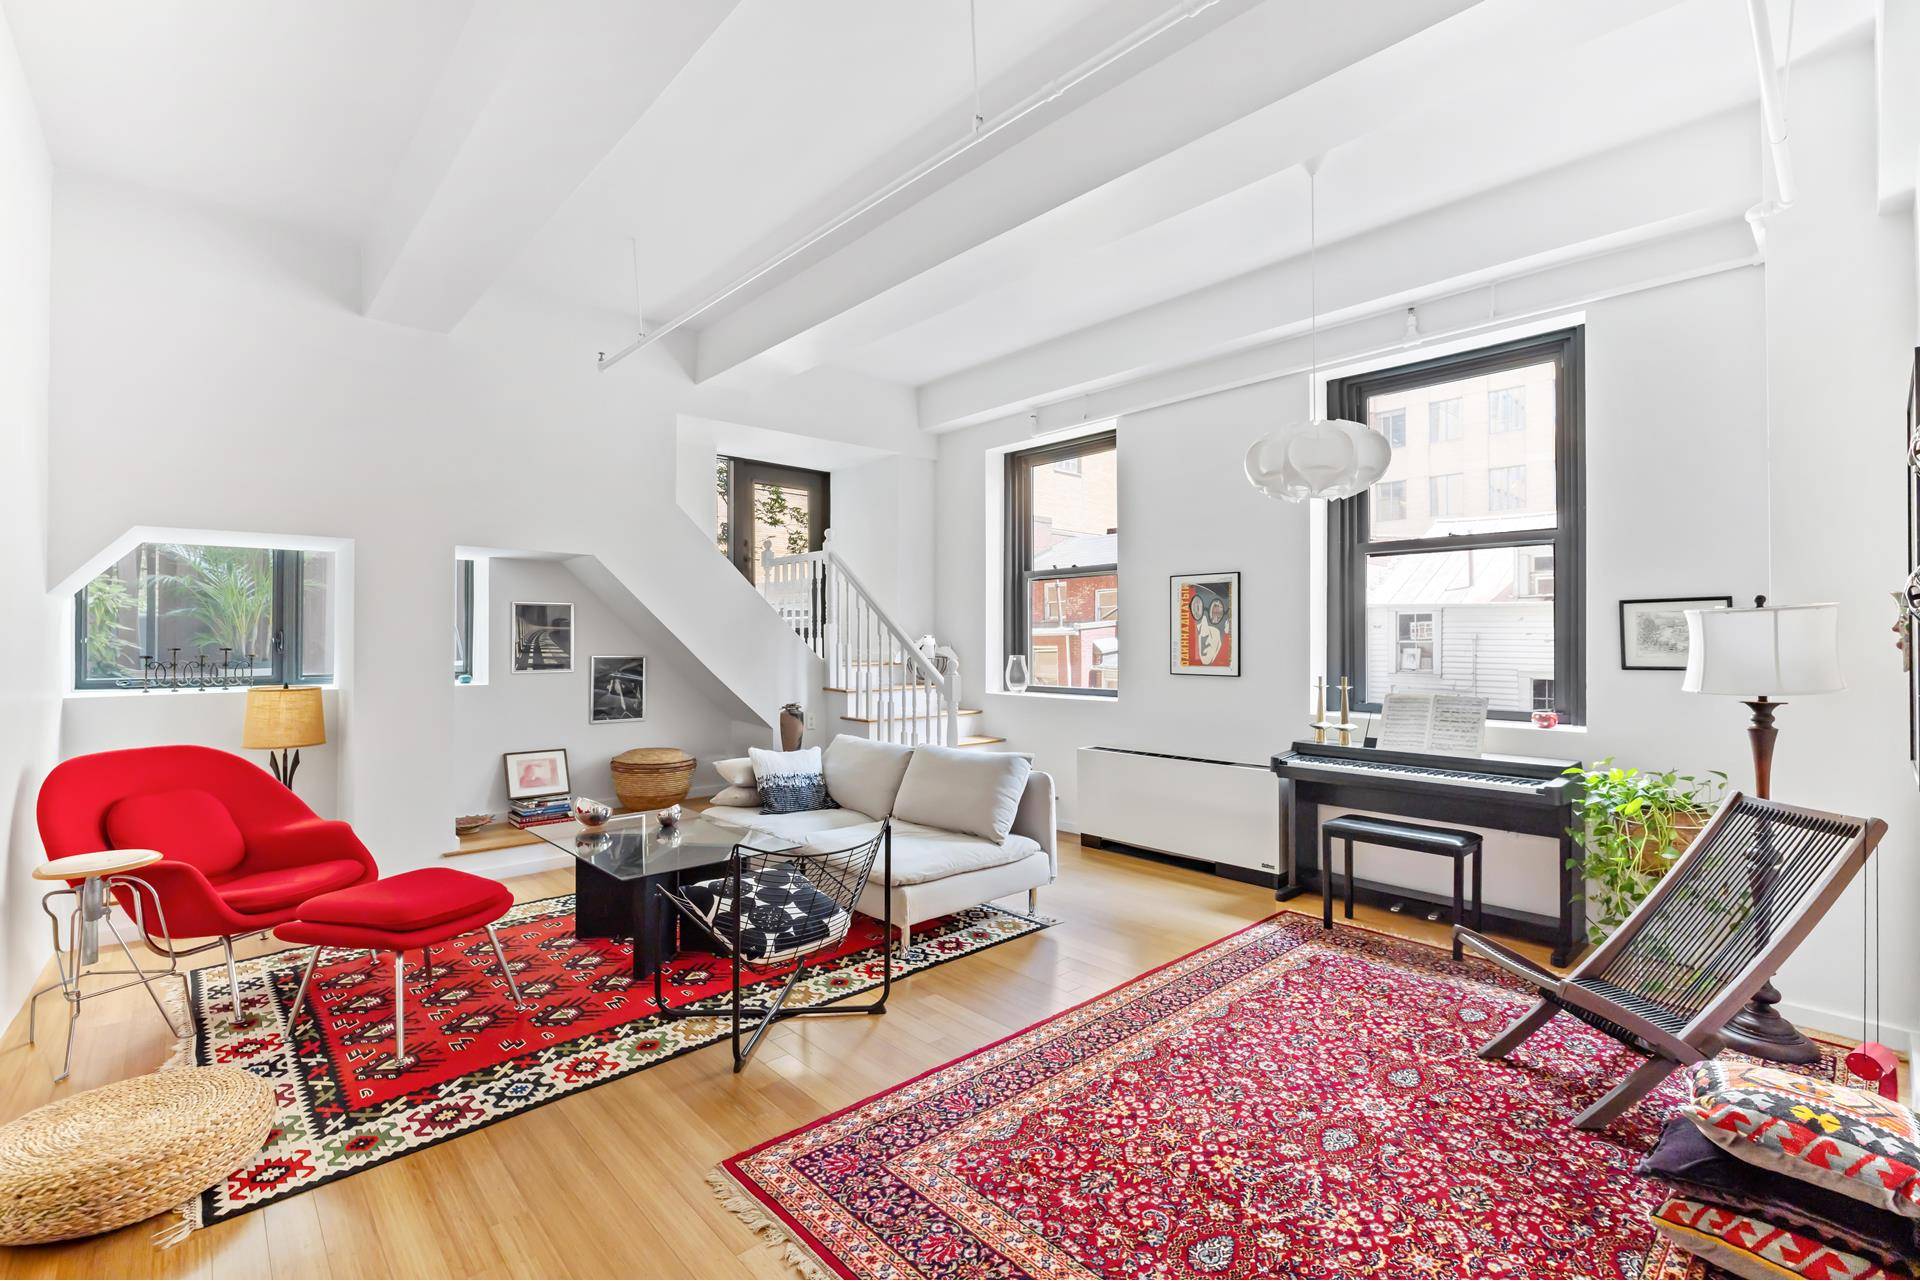 This oversized loft offers nearly 1800 square feet of living space with soaring 12 foot ceilings, three bedroom sleeping rooms plus den, two full bathrooms and a private terrace accessed ...